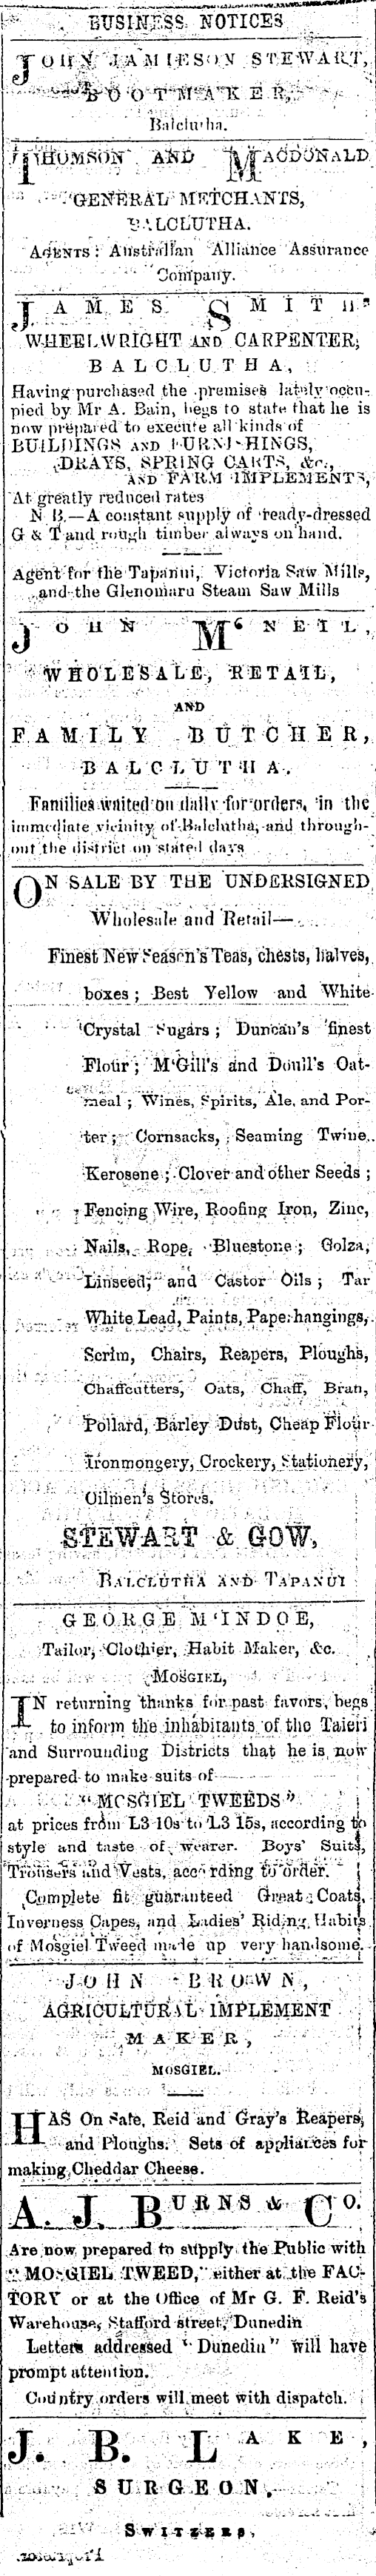 Papers Past Newspapers Bruce Herald December 1871 Page 1 Advertisements Column 5